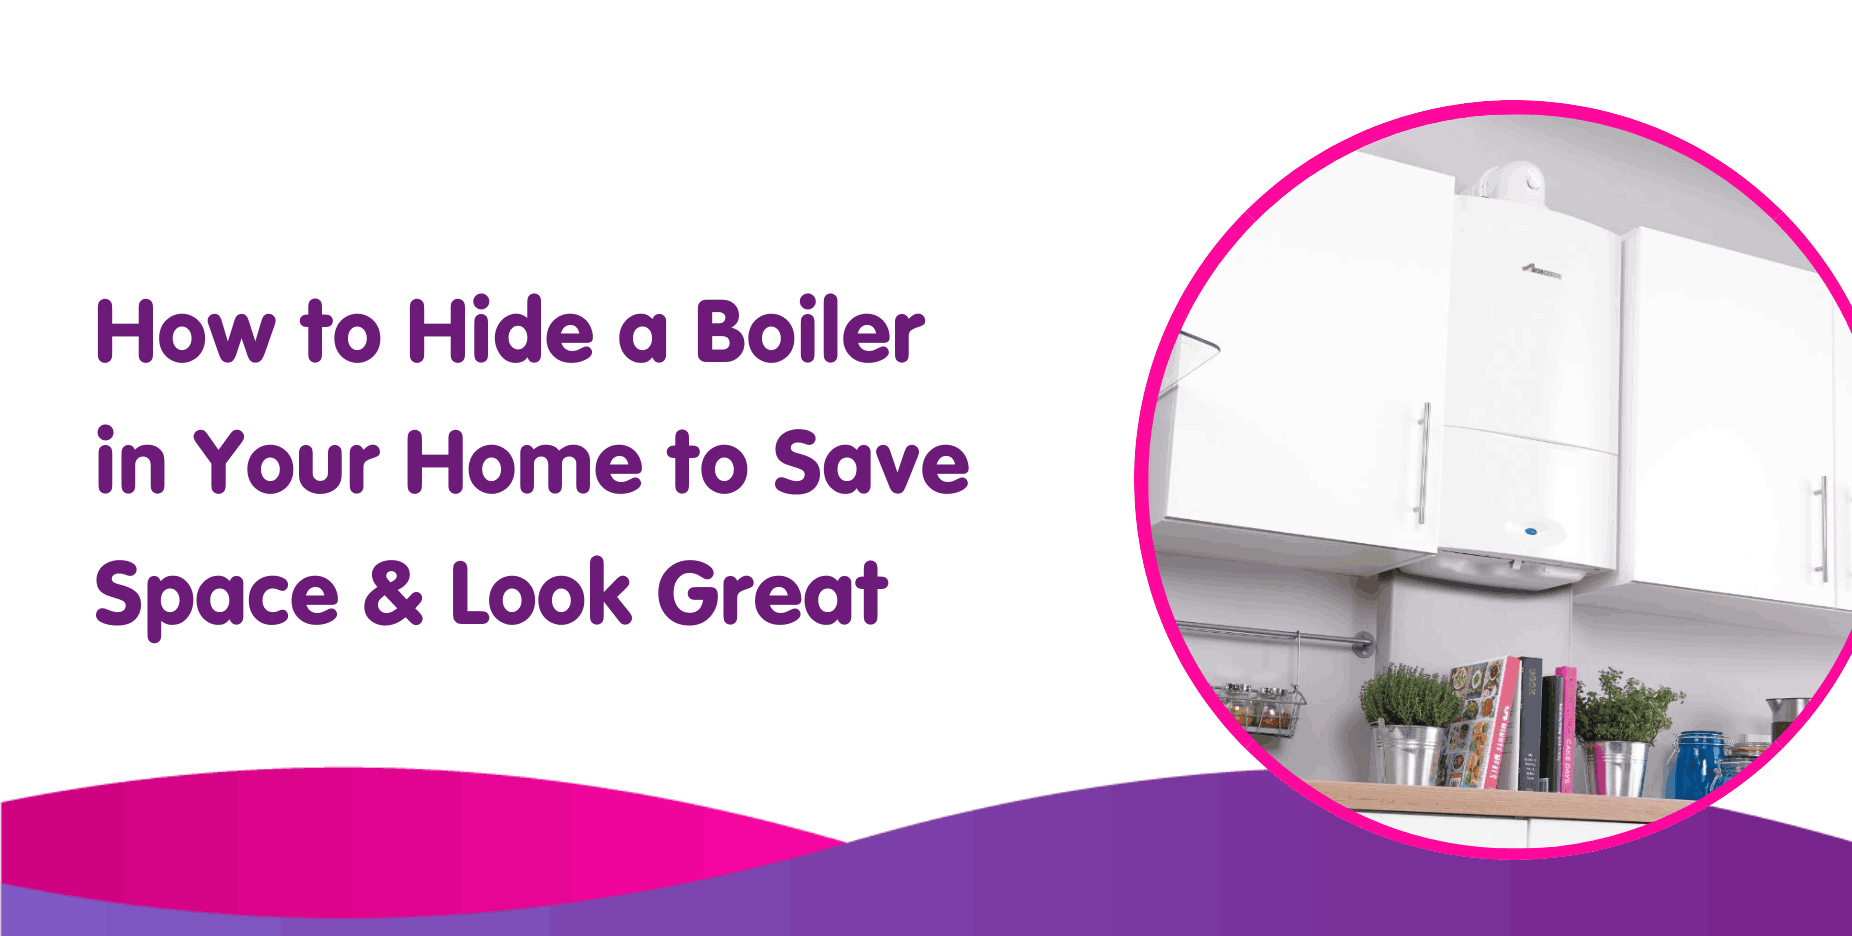 How to Hide a Boiler in Your Home to Save Space & Look Great